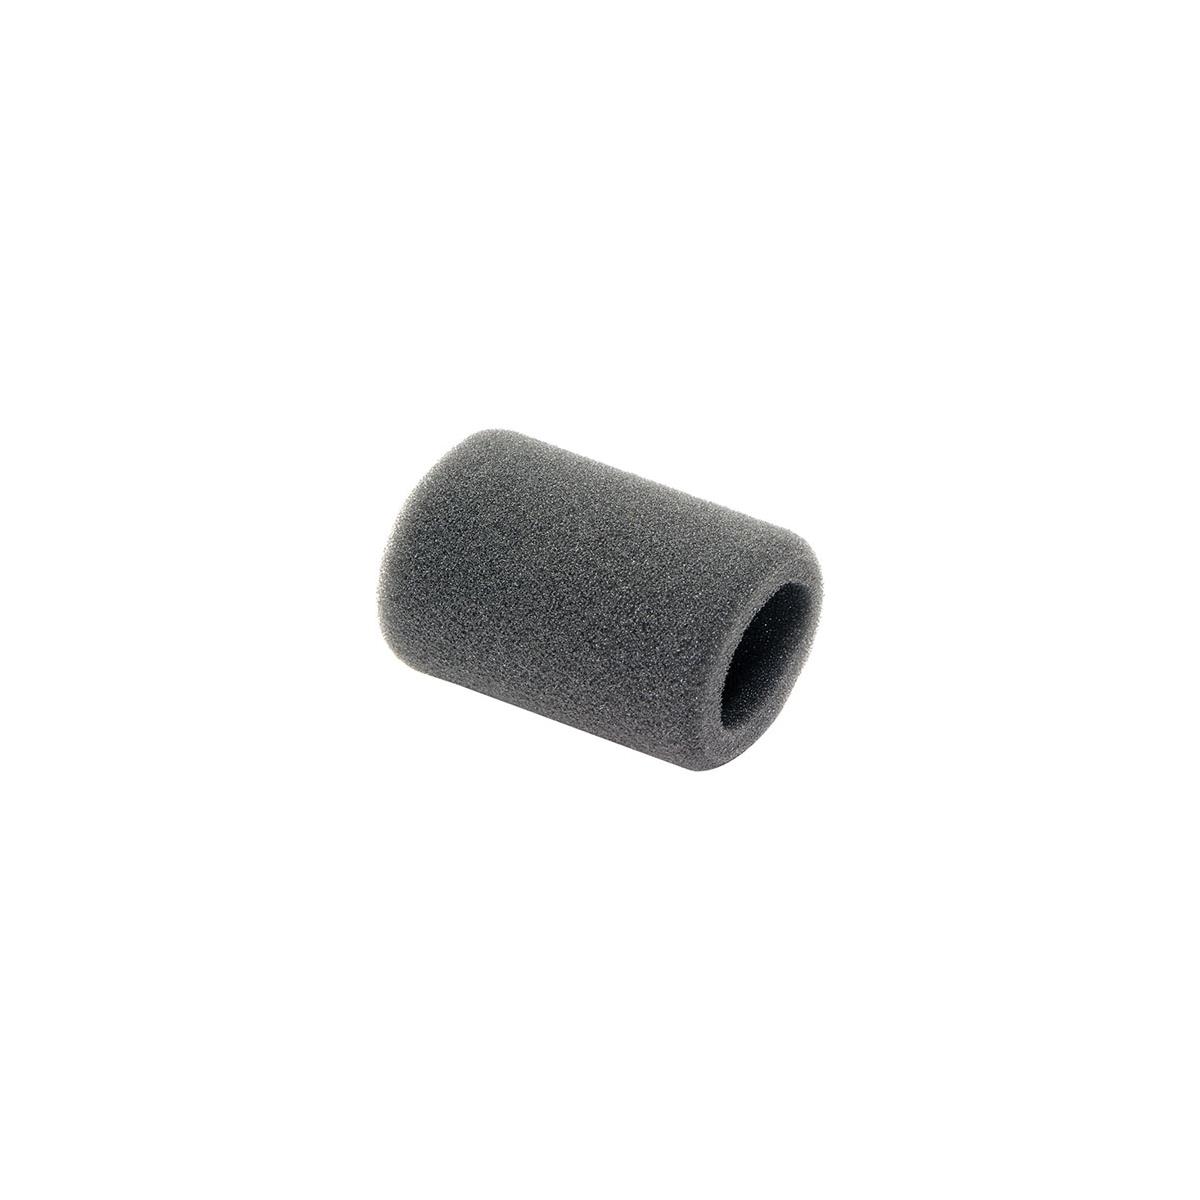 Image of Schoeps B1 Simple Capsule Guard for CCM Microphone/Colette Capsule